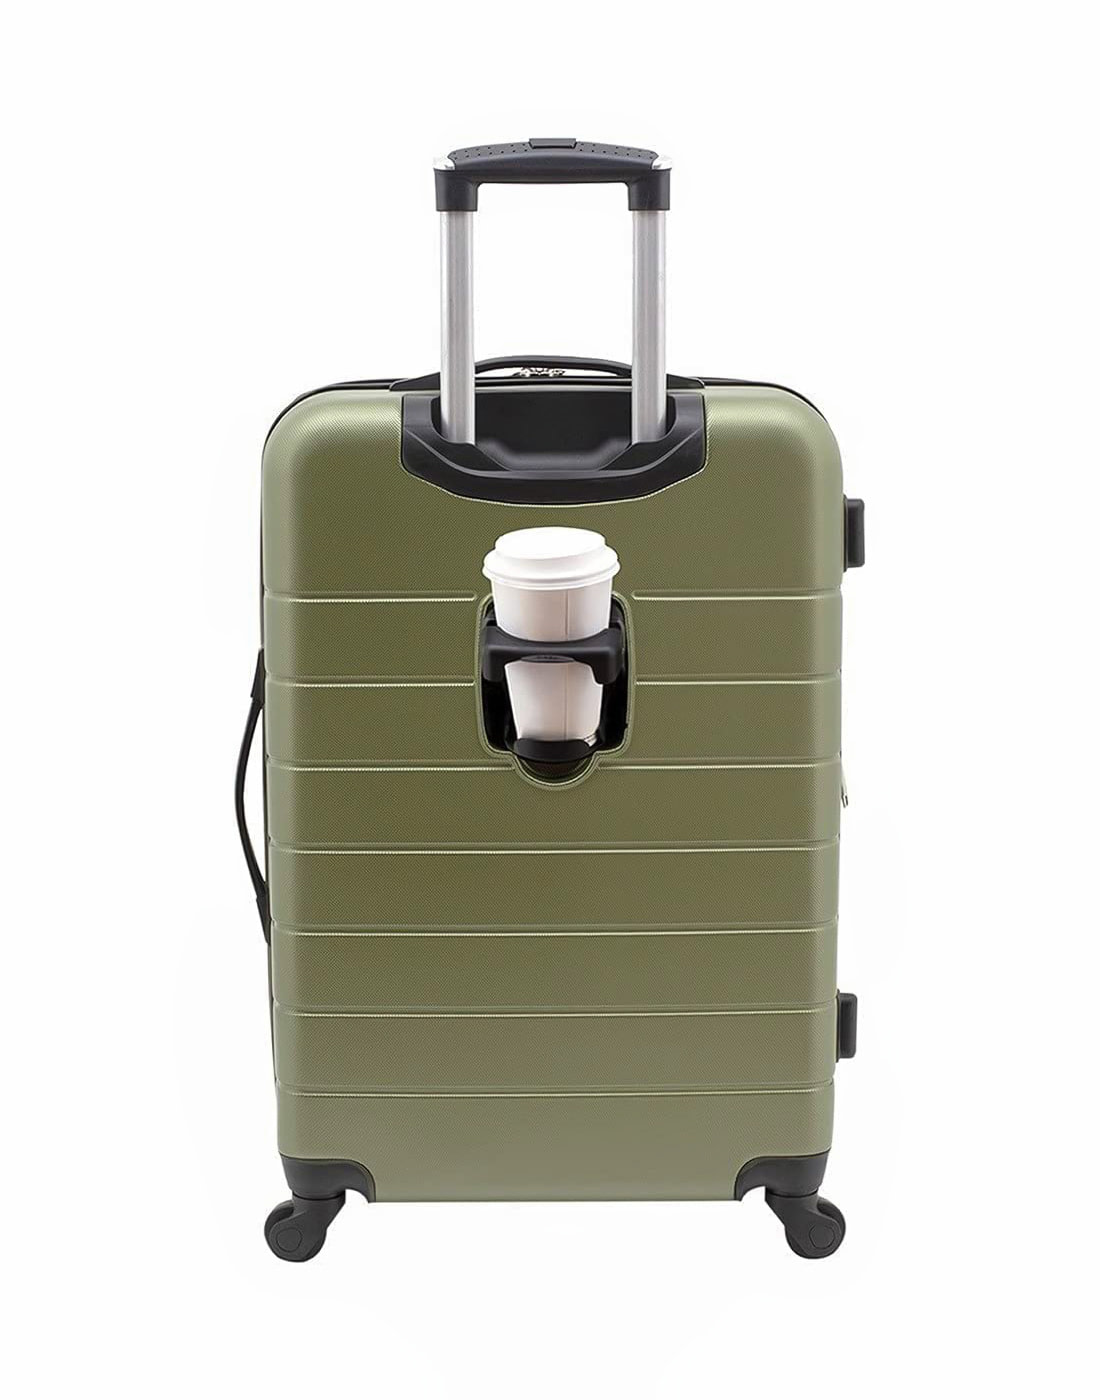 Cheap carry on luggage you can buy online